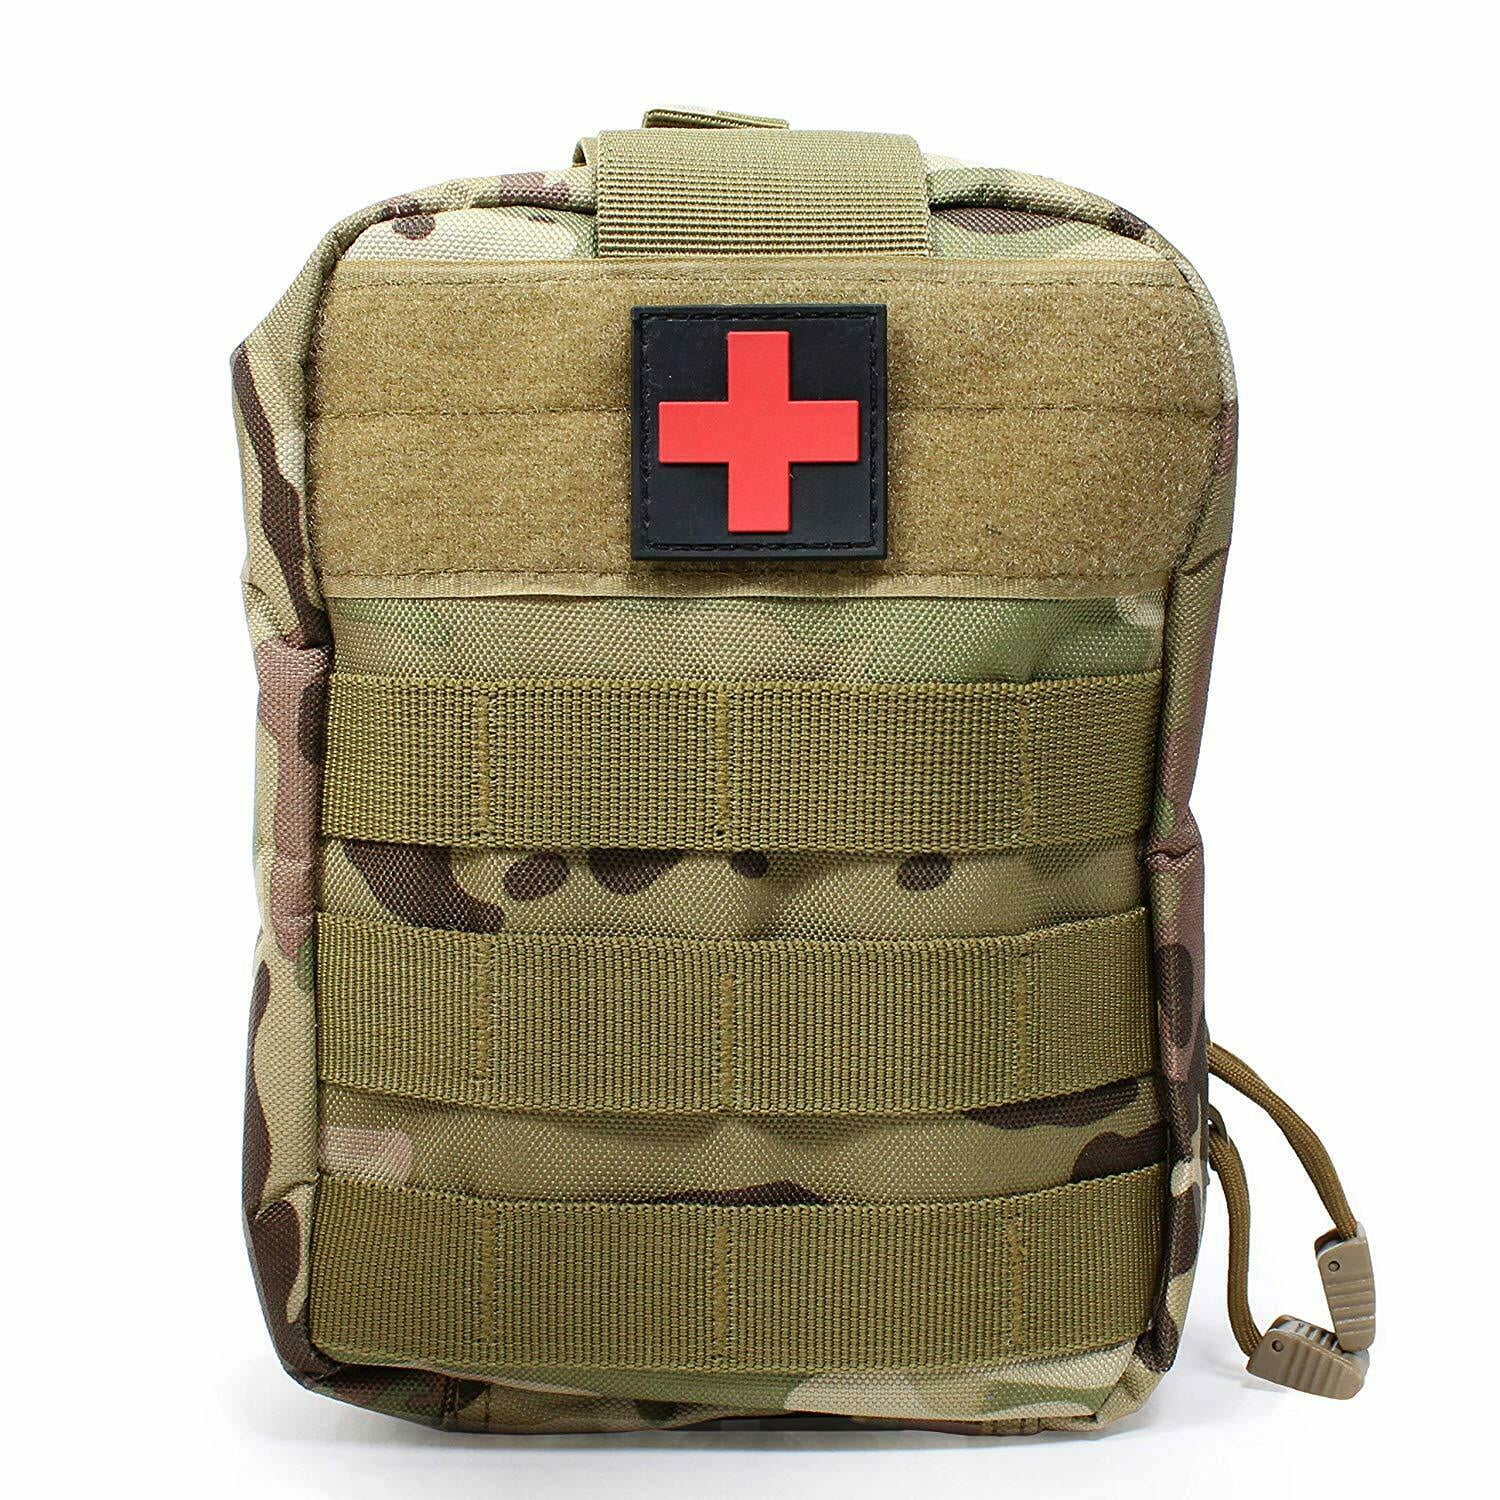 Tactical Military MOLLE EMT First Aid IFAK Utility Medical Pouch Kit Utility Bag